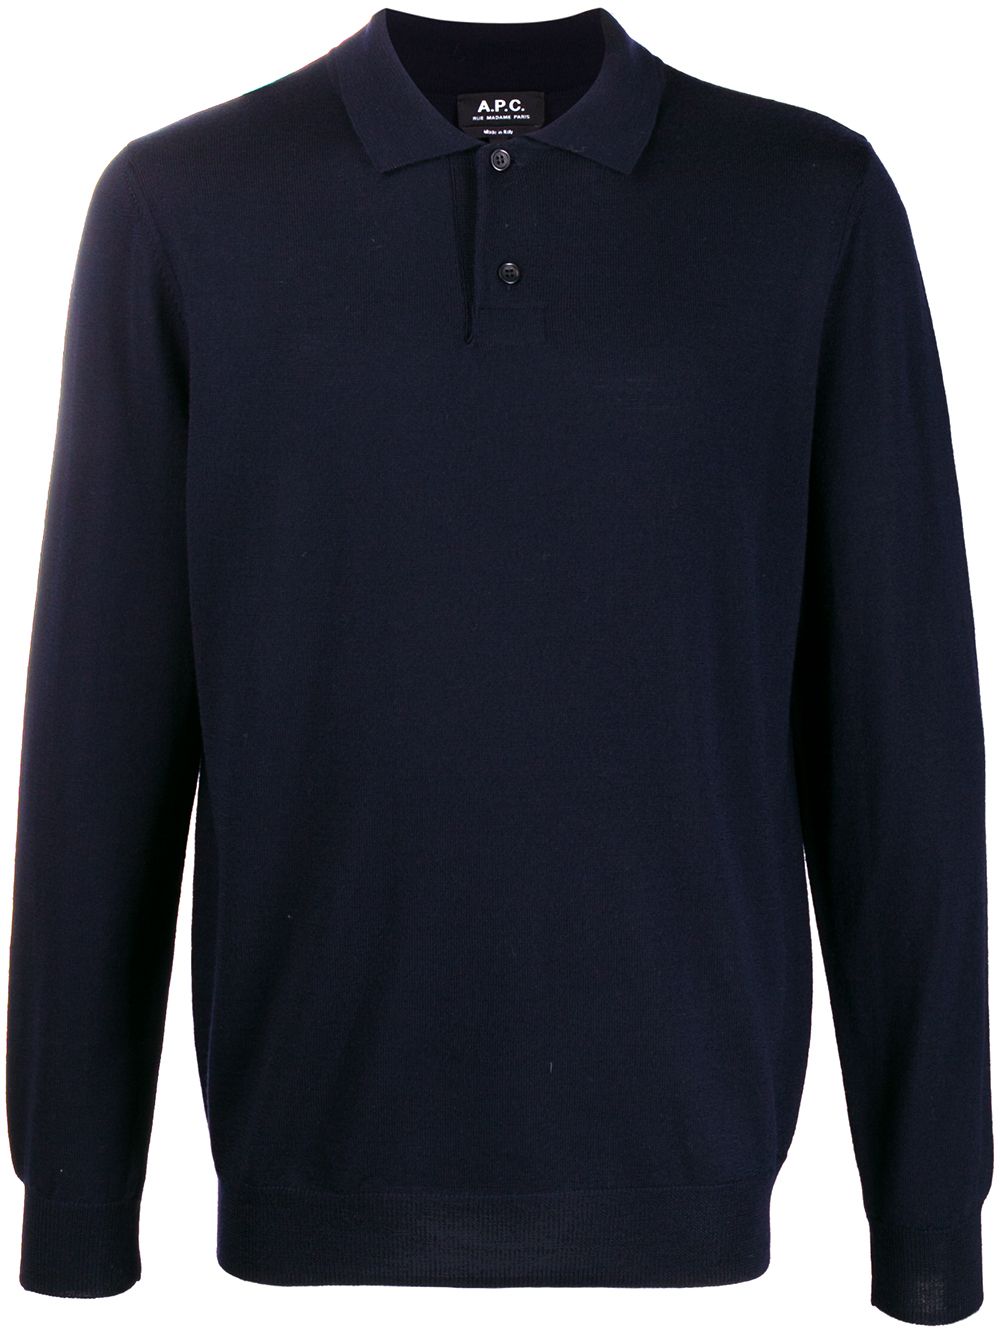 A.P.C. polo neck knitted sweater - Blue von A.P.C.